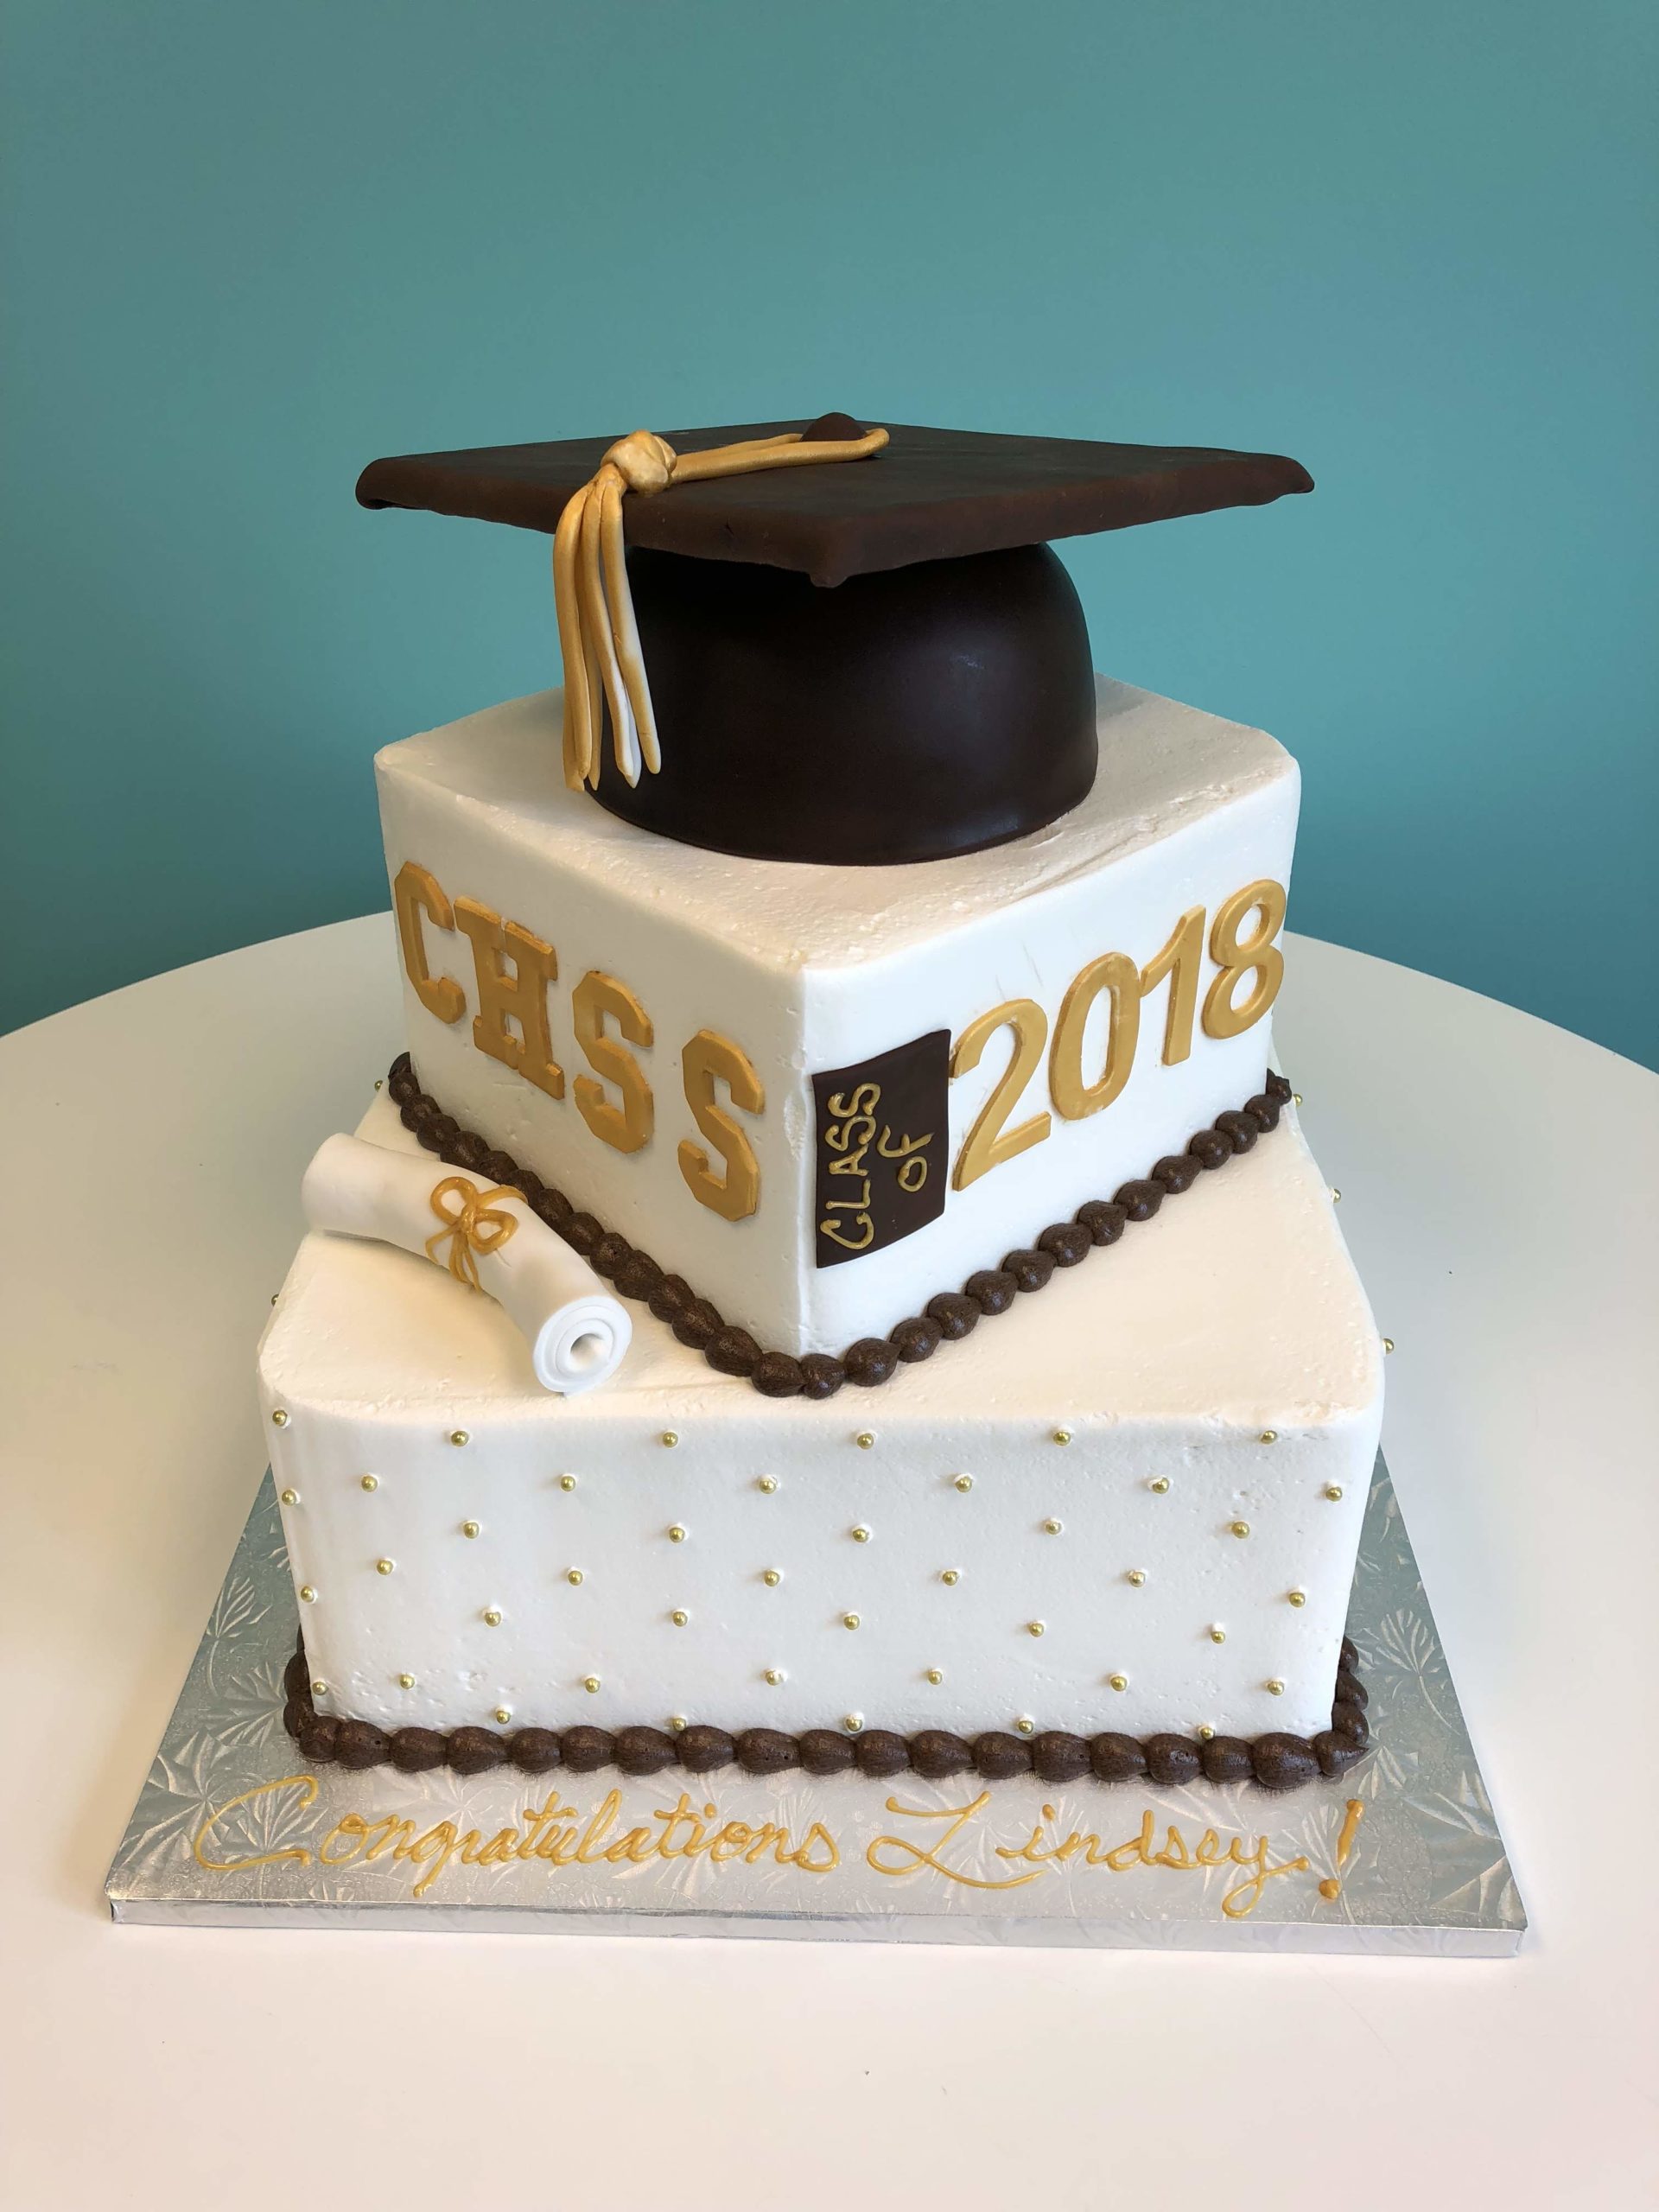 III. Tips for Choosing the Perfect Graduation Cake